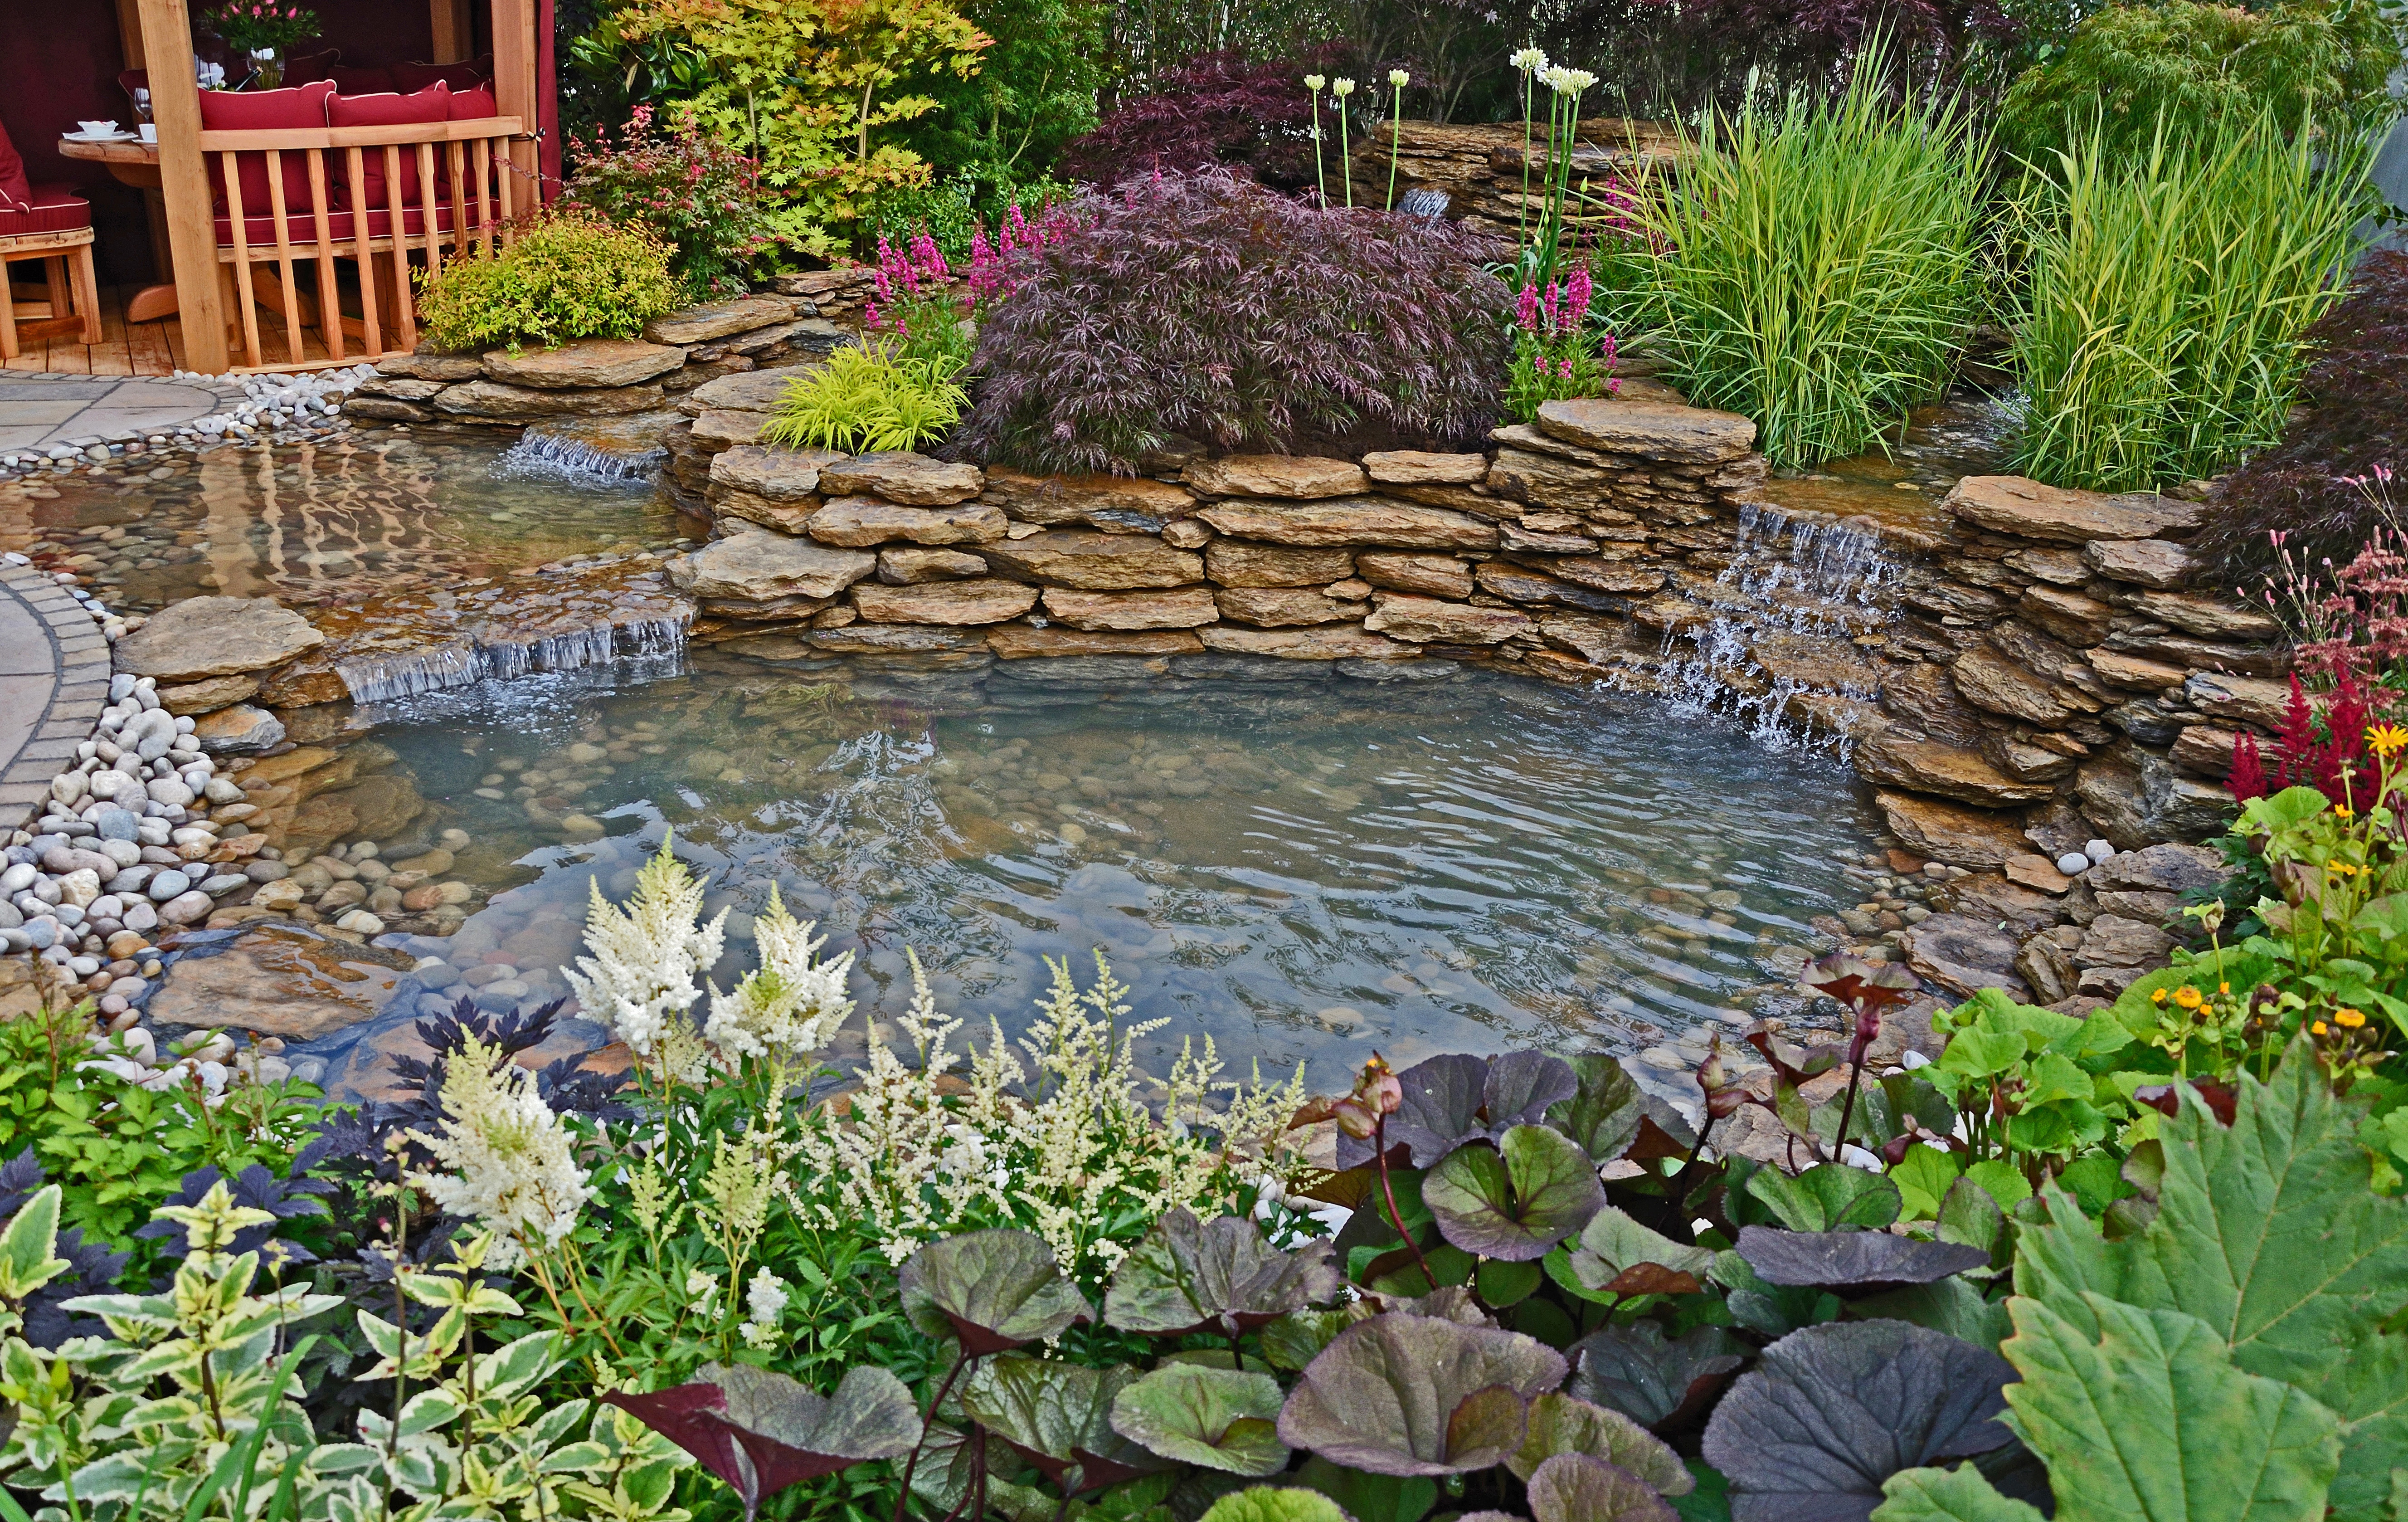 The pond area in an aquatic garden with planted rockery and waterfalls and summer house